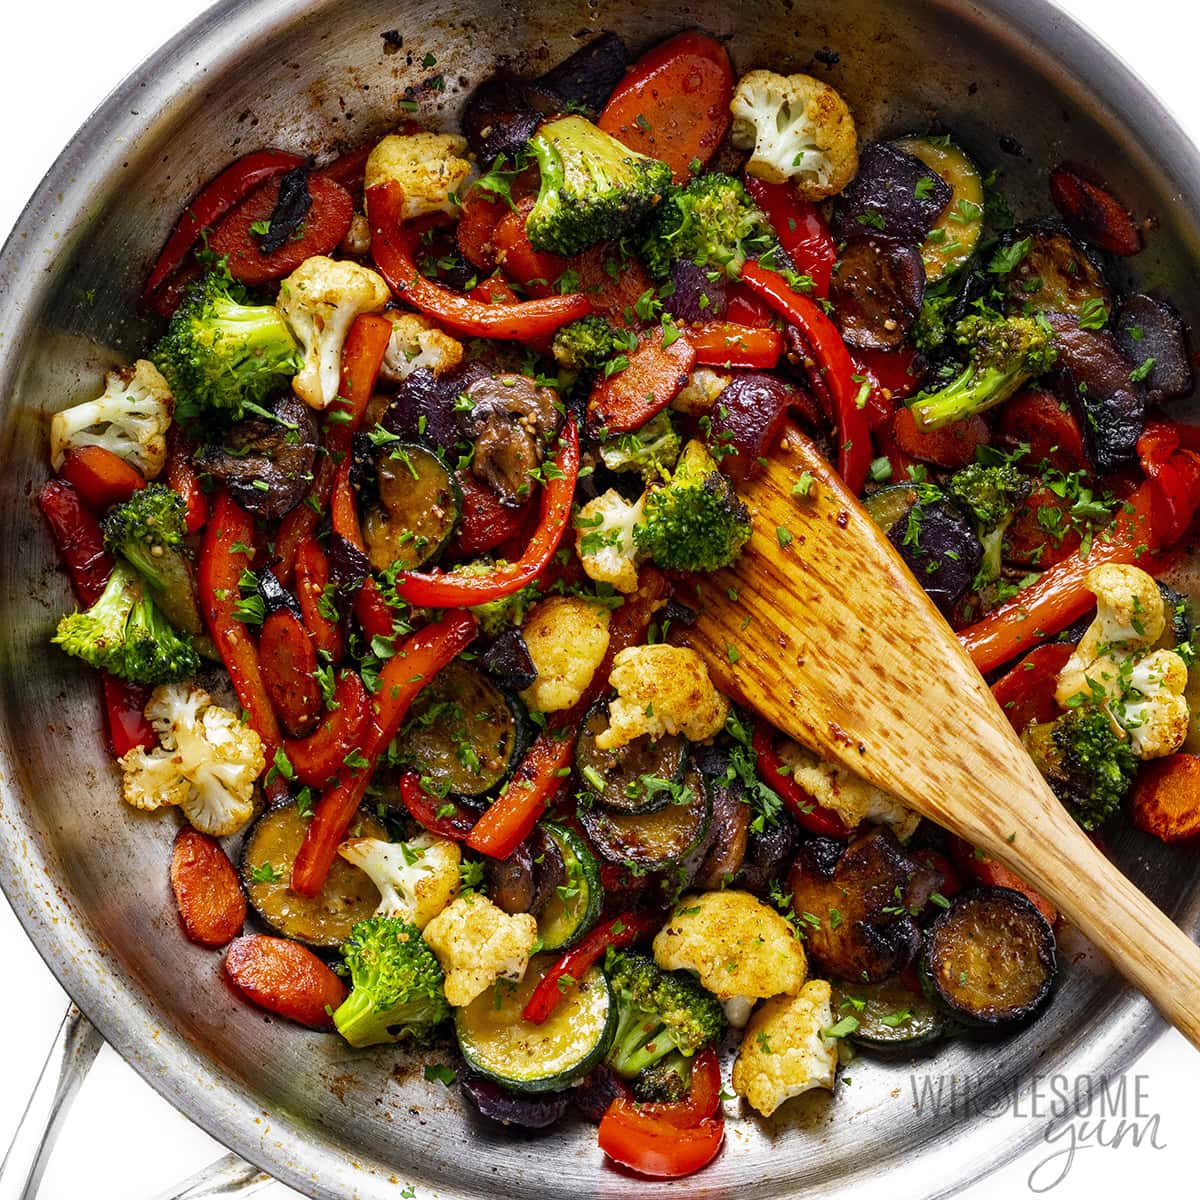 Finished sauteed vegetables in pan. 